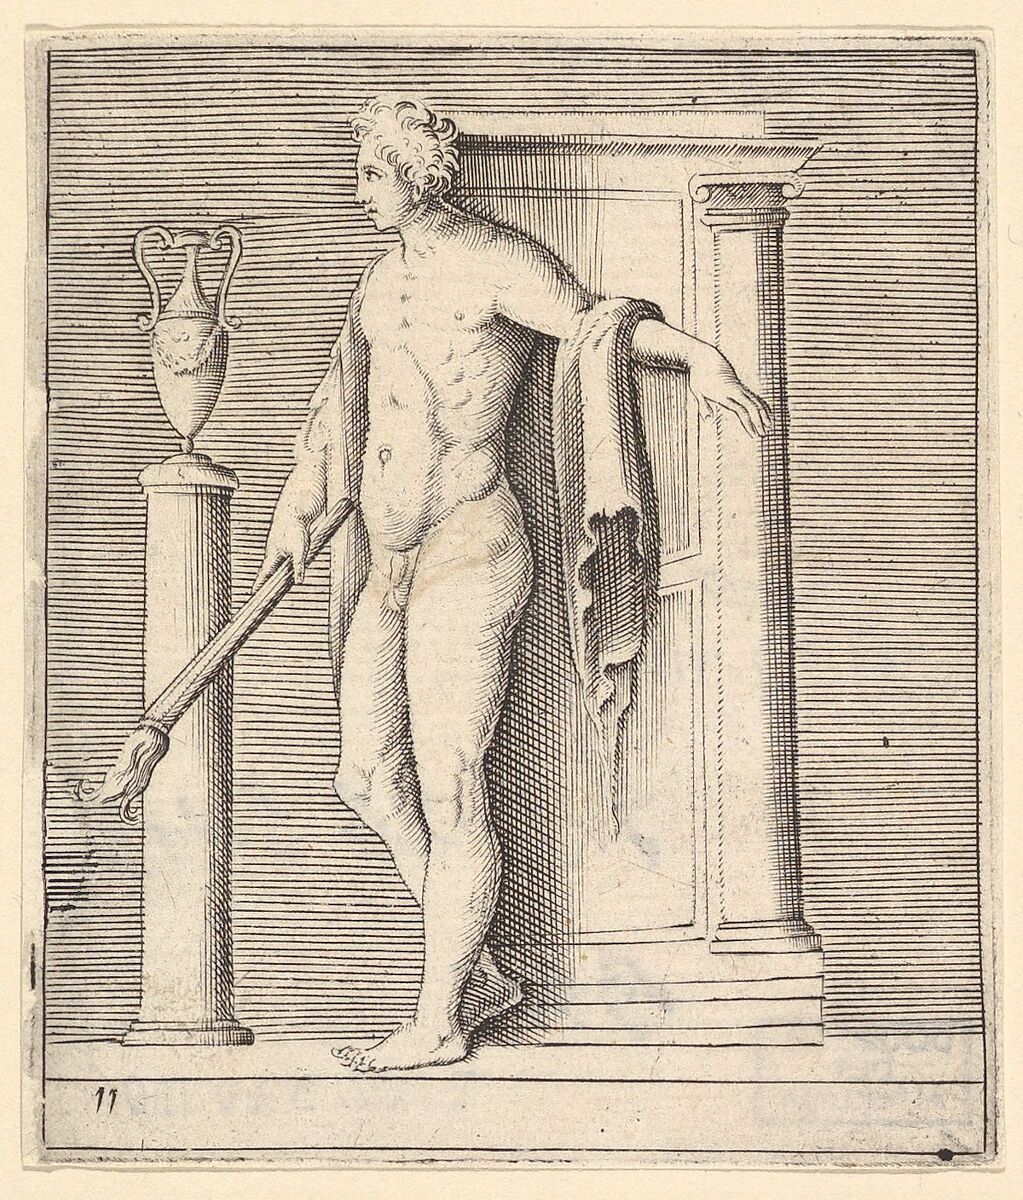 Man with Torch at Temple Door, from "Ex Antiquis Cameorum et Gemmae Delineata/ Liber Secundus/et ab Enea Vico Parmen Incis", Engraved by Anonymous, Italian, 16th century, Engraving; third state 